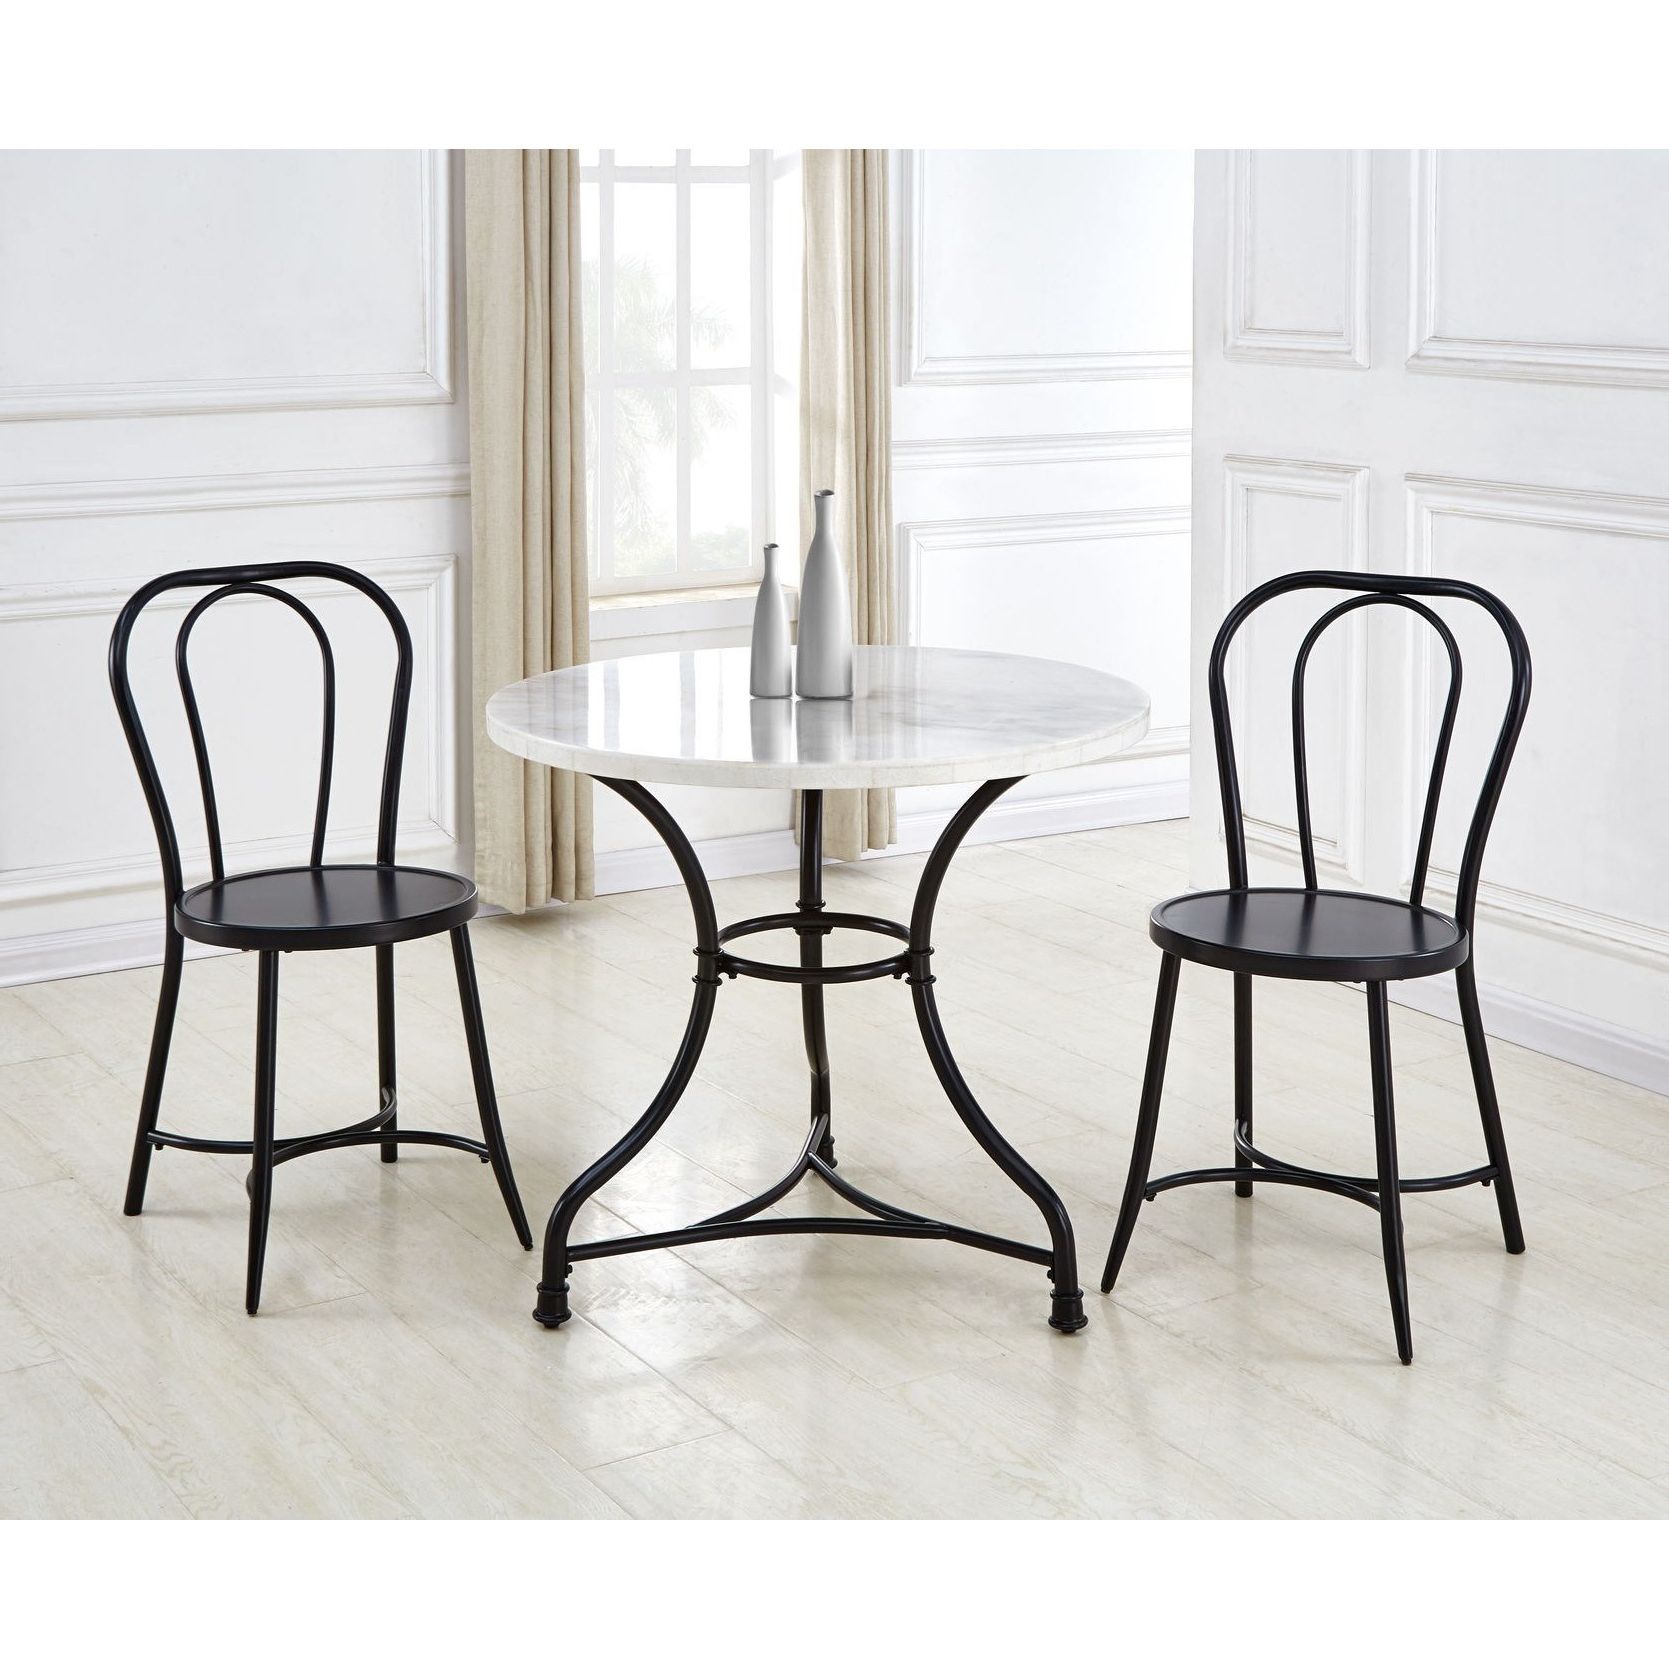 3 Piece Bistro Dining Sets Intended For Popular Belfort Essentials Claire Contemporary 3 Piece Bistro Table And Chair (View 13 of 15)